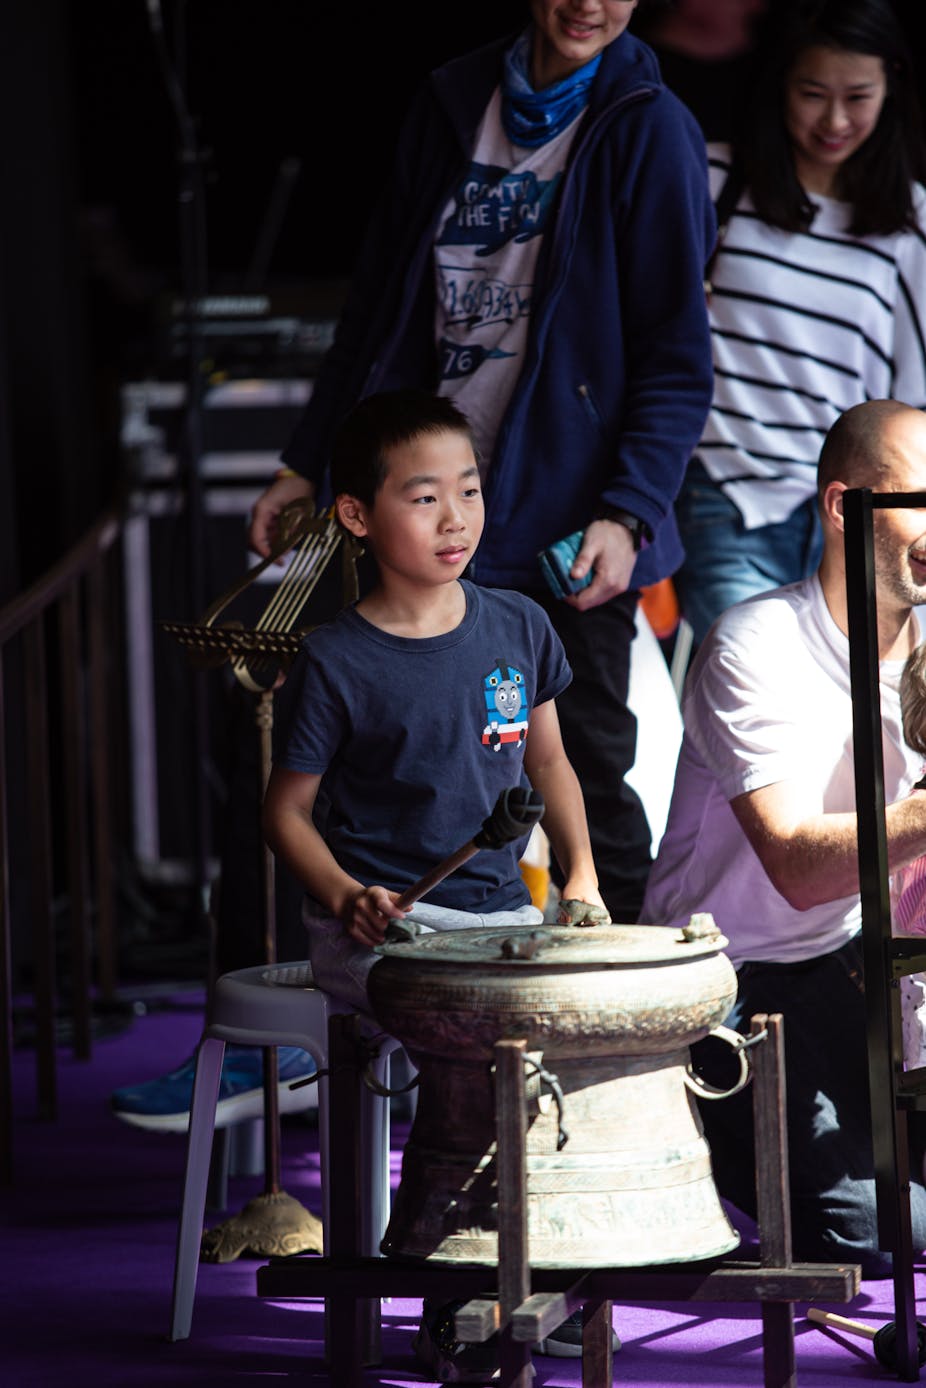 Child holding a rubber striker and sitting next to a bronze drum in front of other audience members 